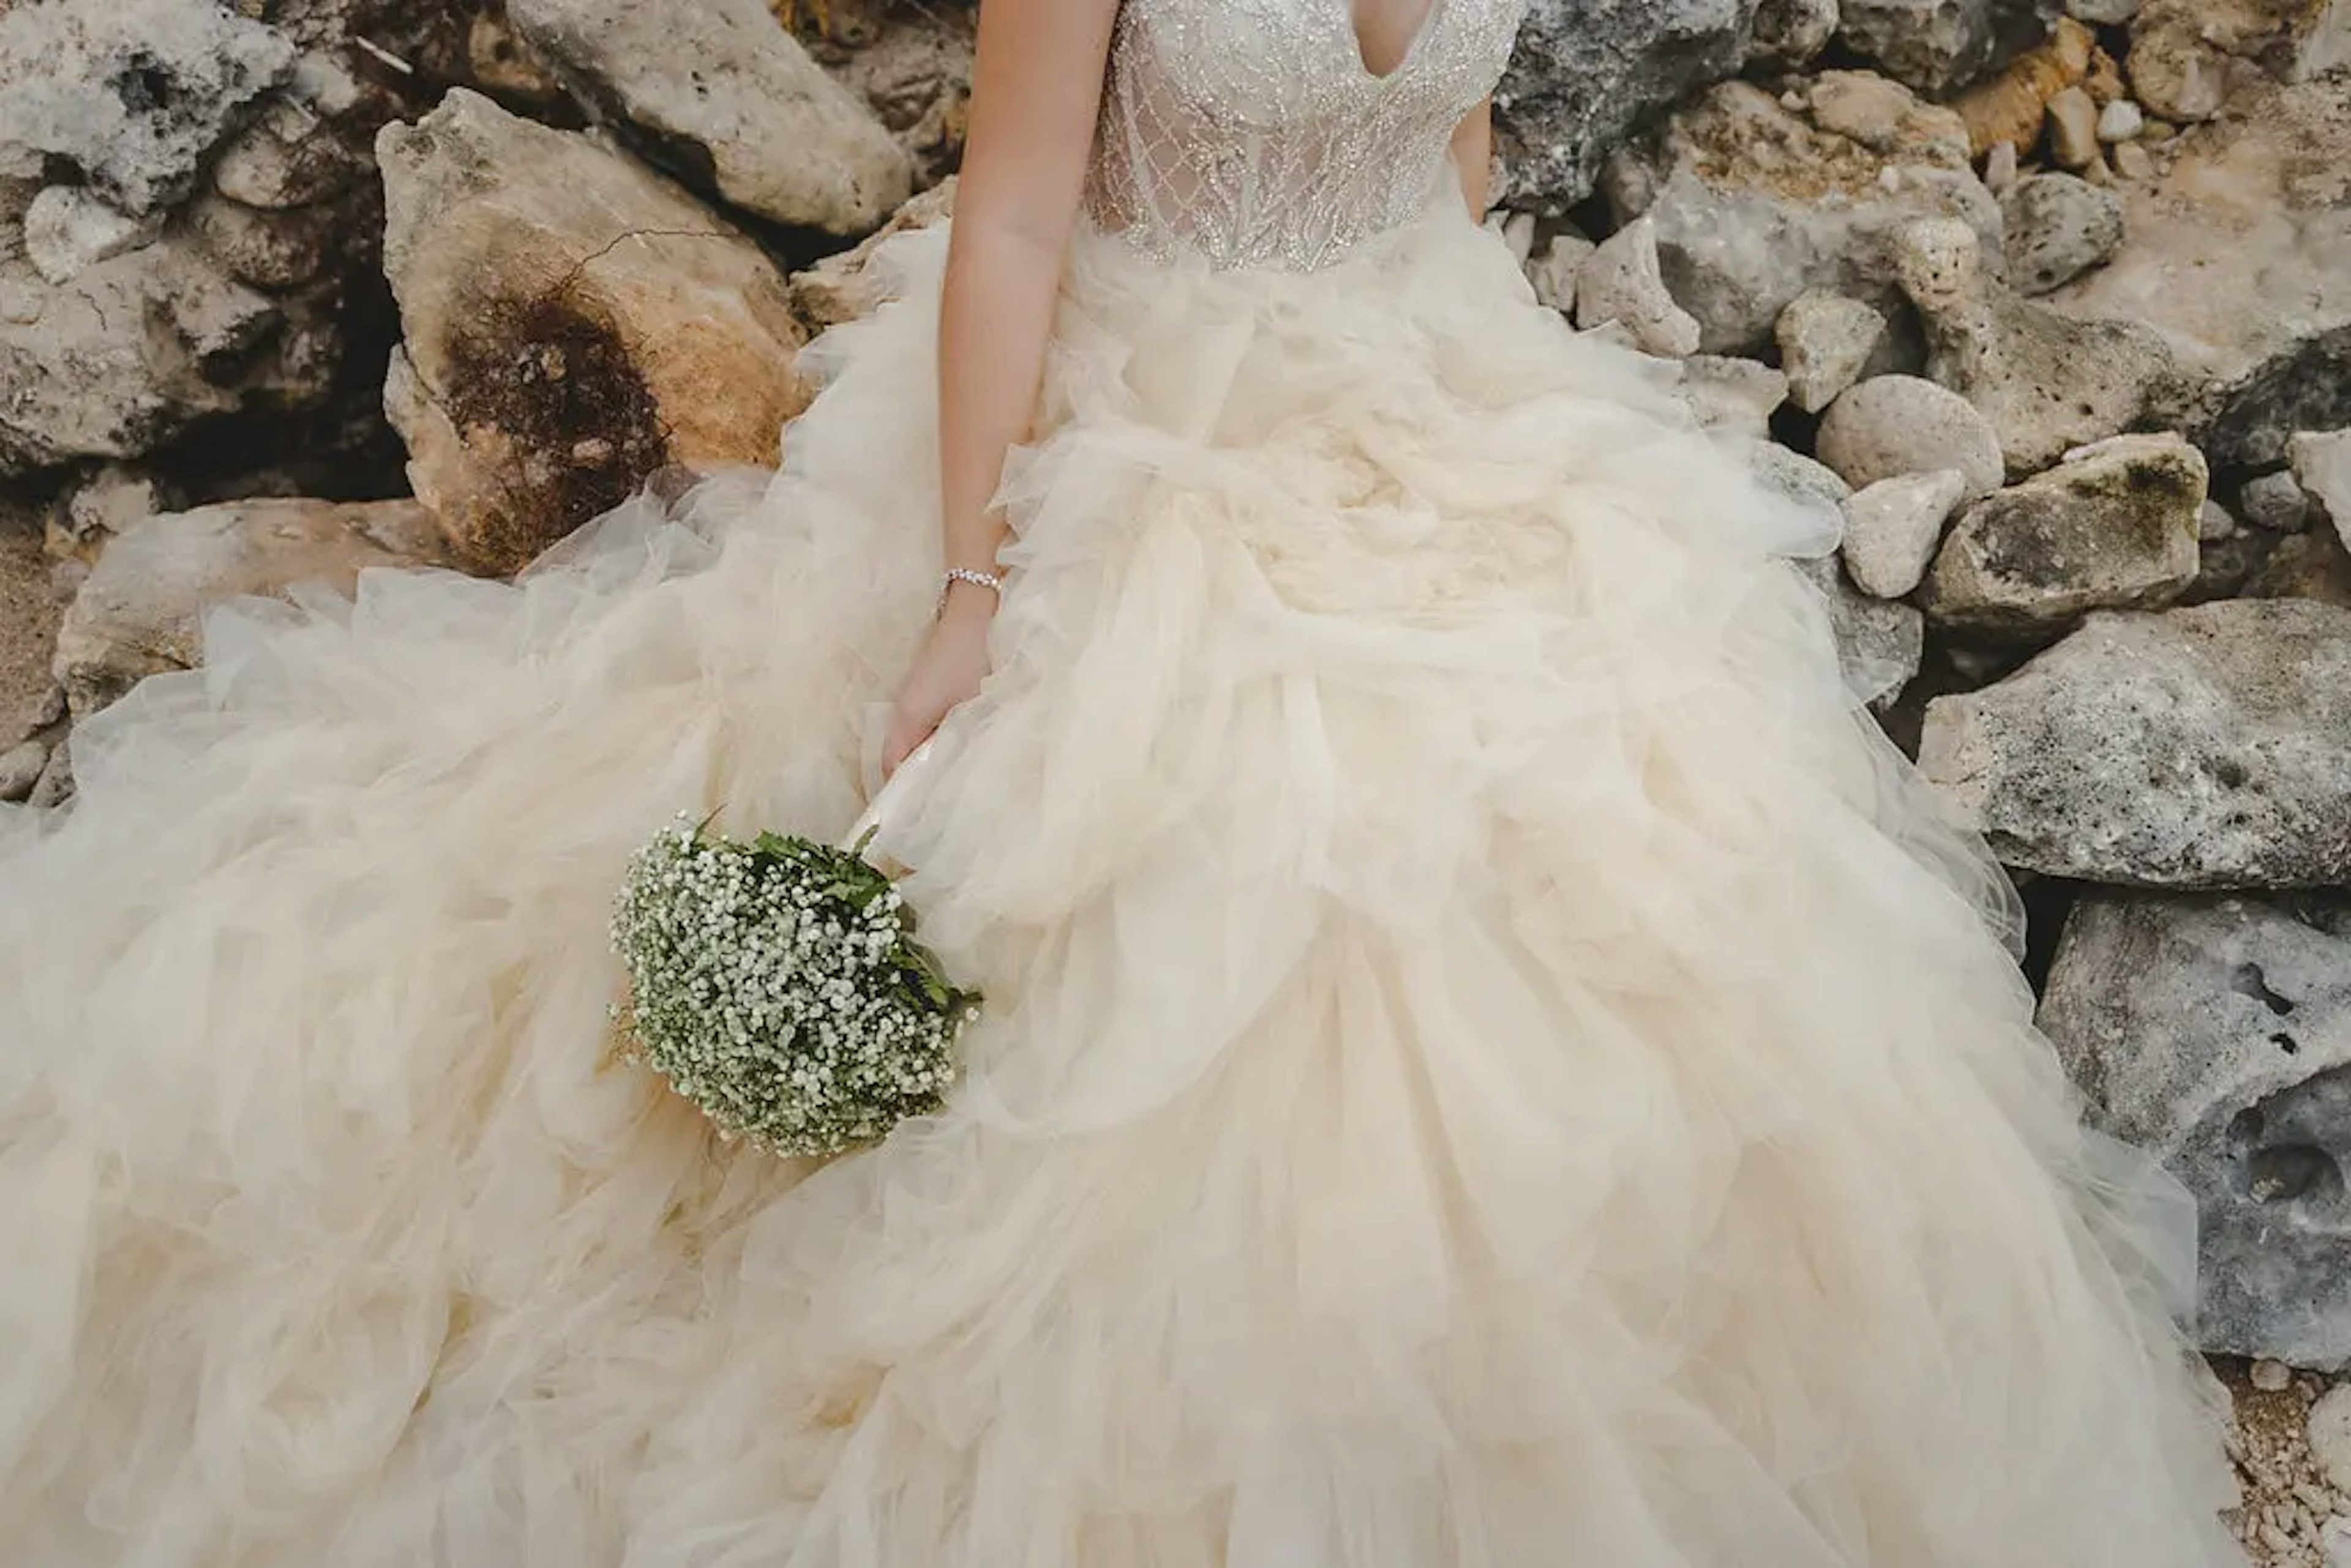 A close-up of a bride holding a delicate baby's breath bouquet, with a detailed view of her ornate lace bodice and voluminous tulle wedding gown against a rugged stone backdrop.